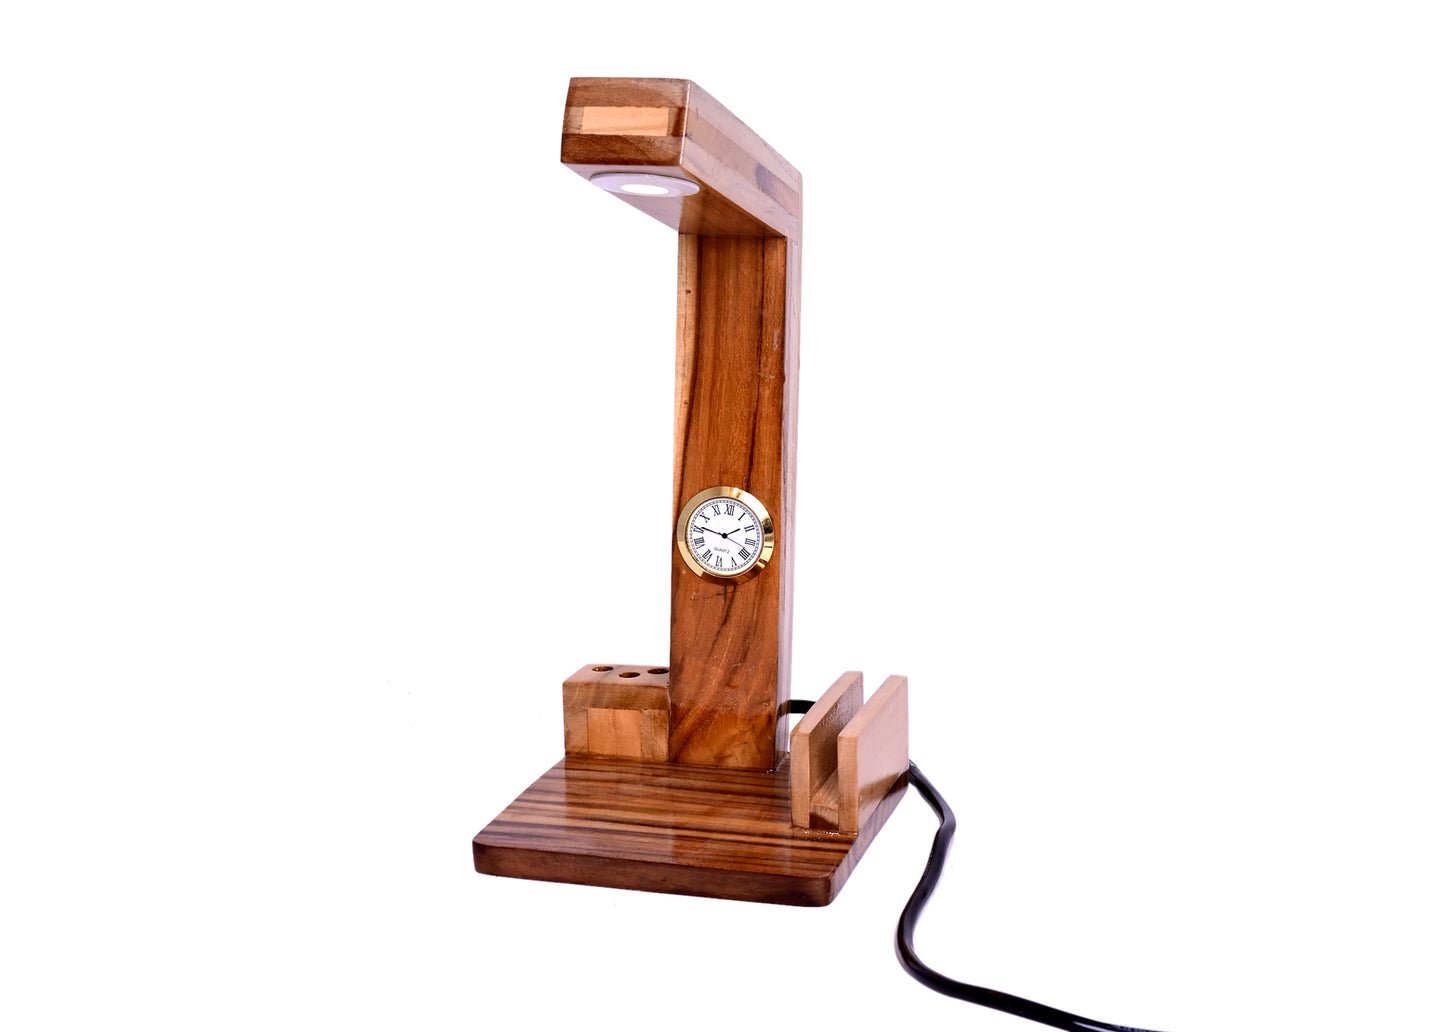 The Weaver's Nest Teak Wood Table Lamp with clock and organiser for Home, Living Room, Study Room, Bedside Tables (Brown, 15 X 15 X 33 cm)